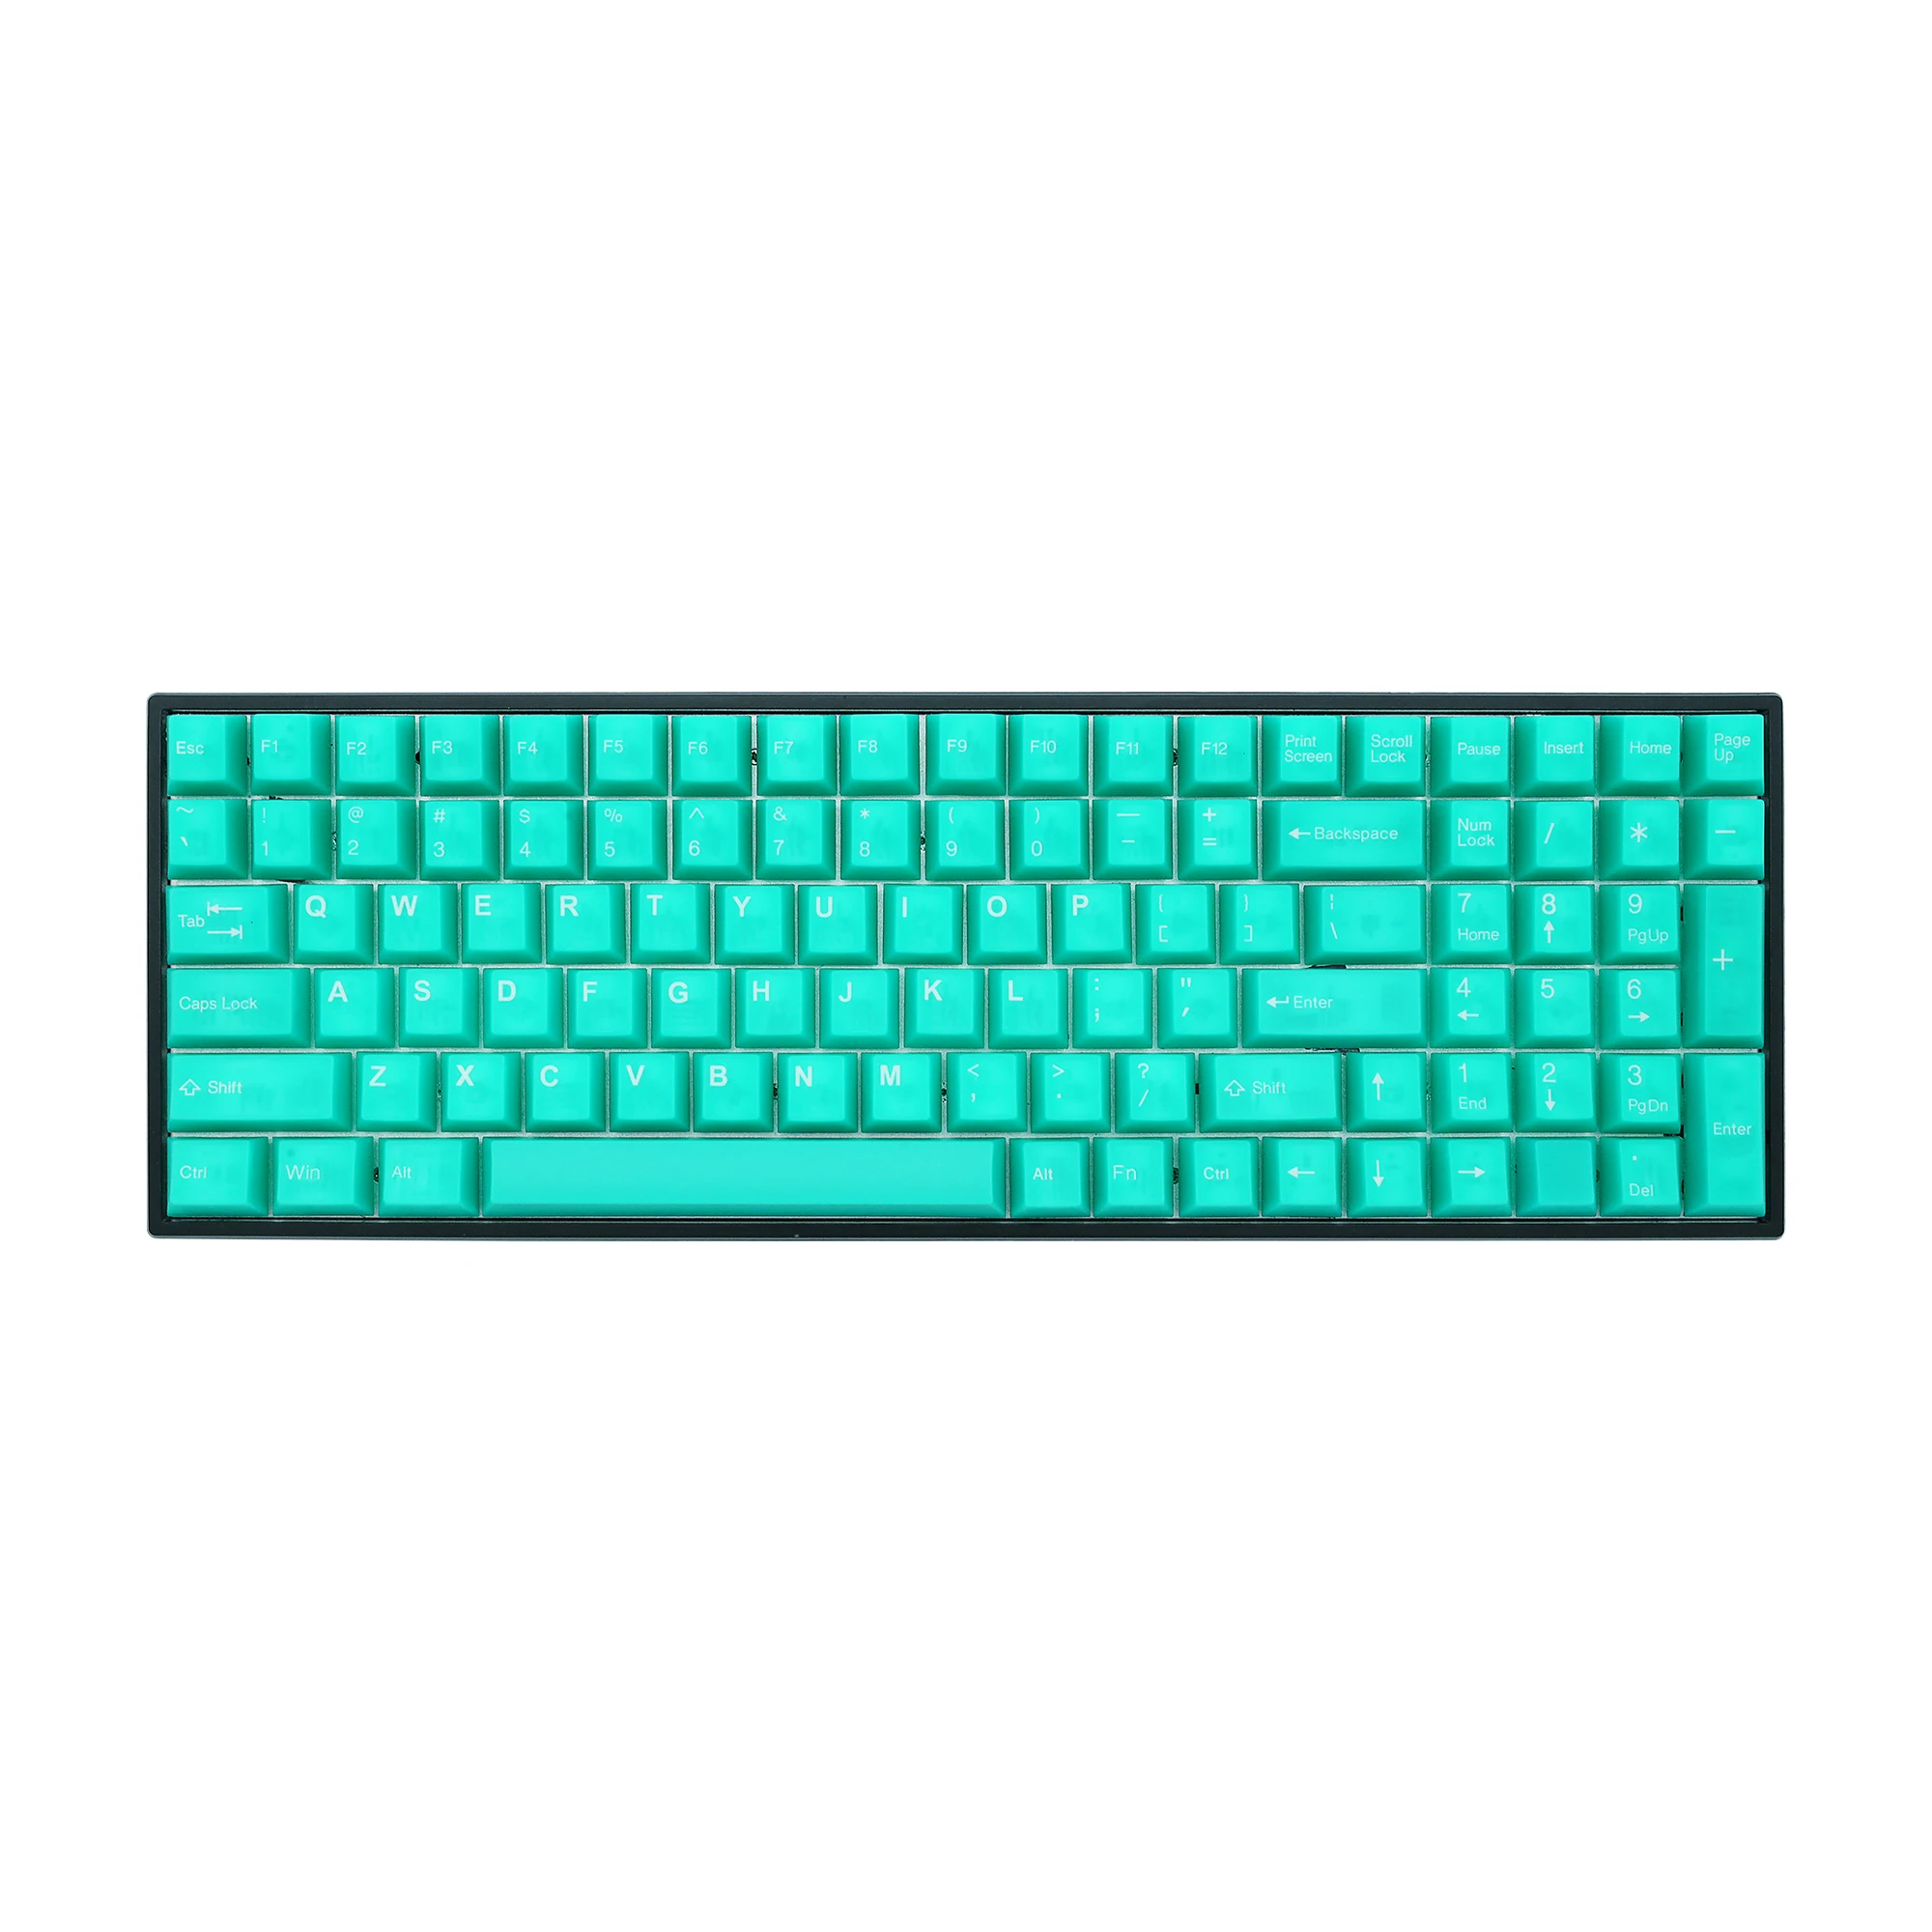 Taihao Haunted Jelly Jade ABS Doubleshot Keycap Translucent Cubic for mechanical keyboard color of Green Colorway - Pudding Keycap